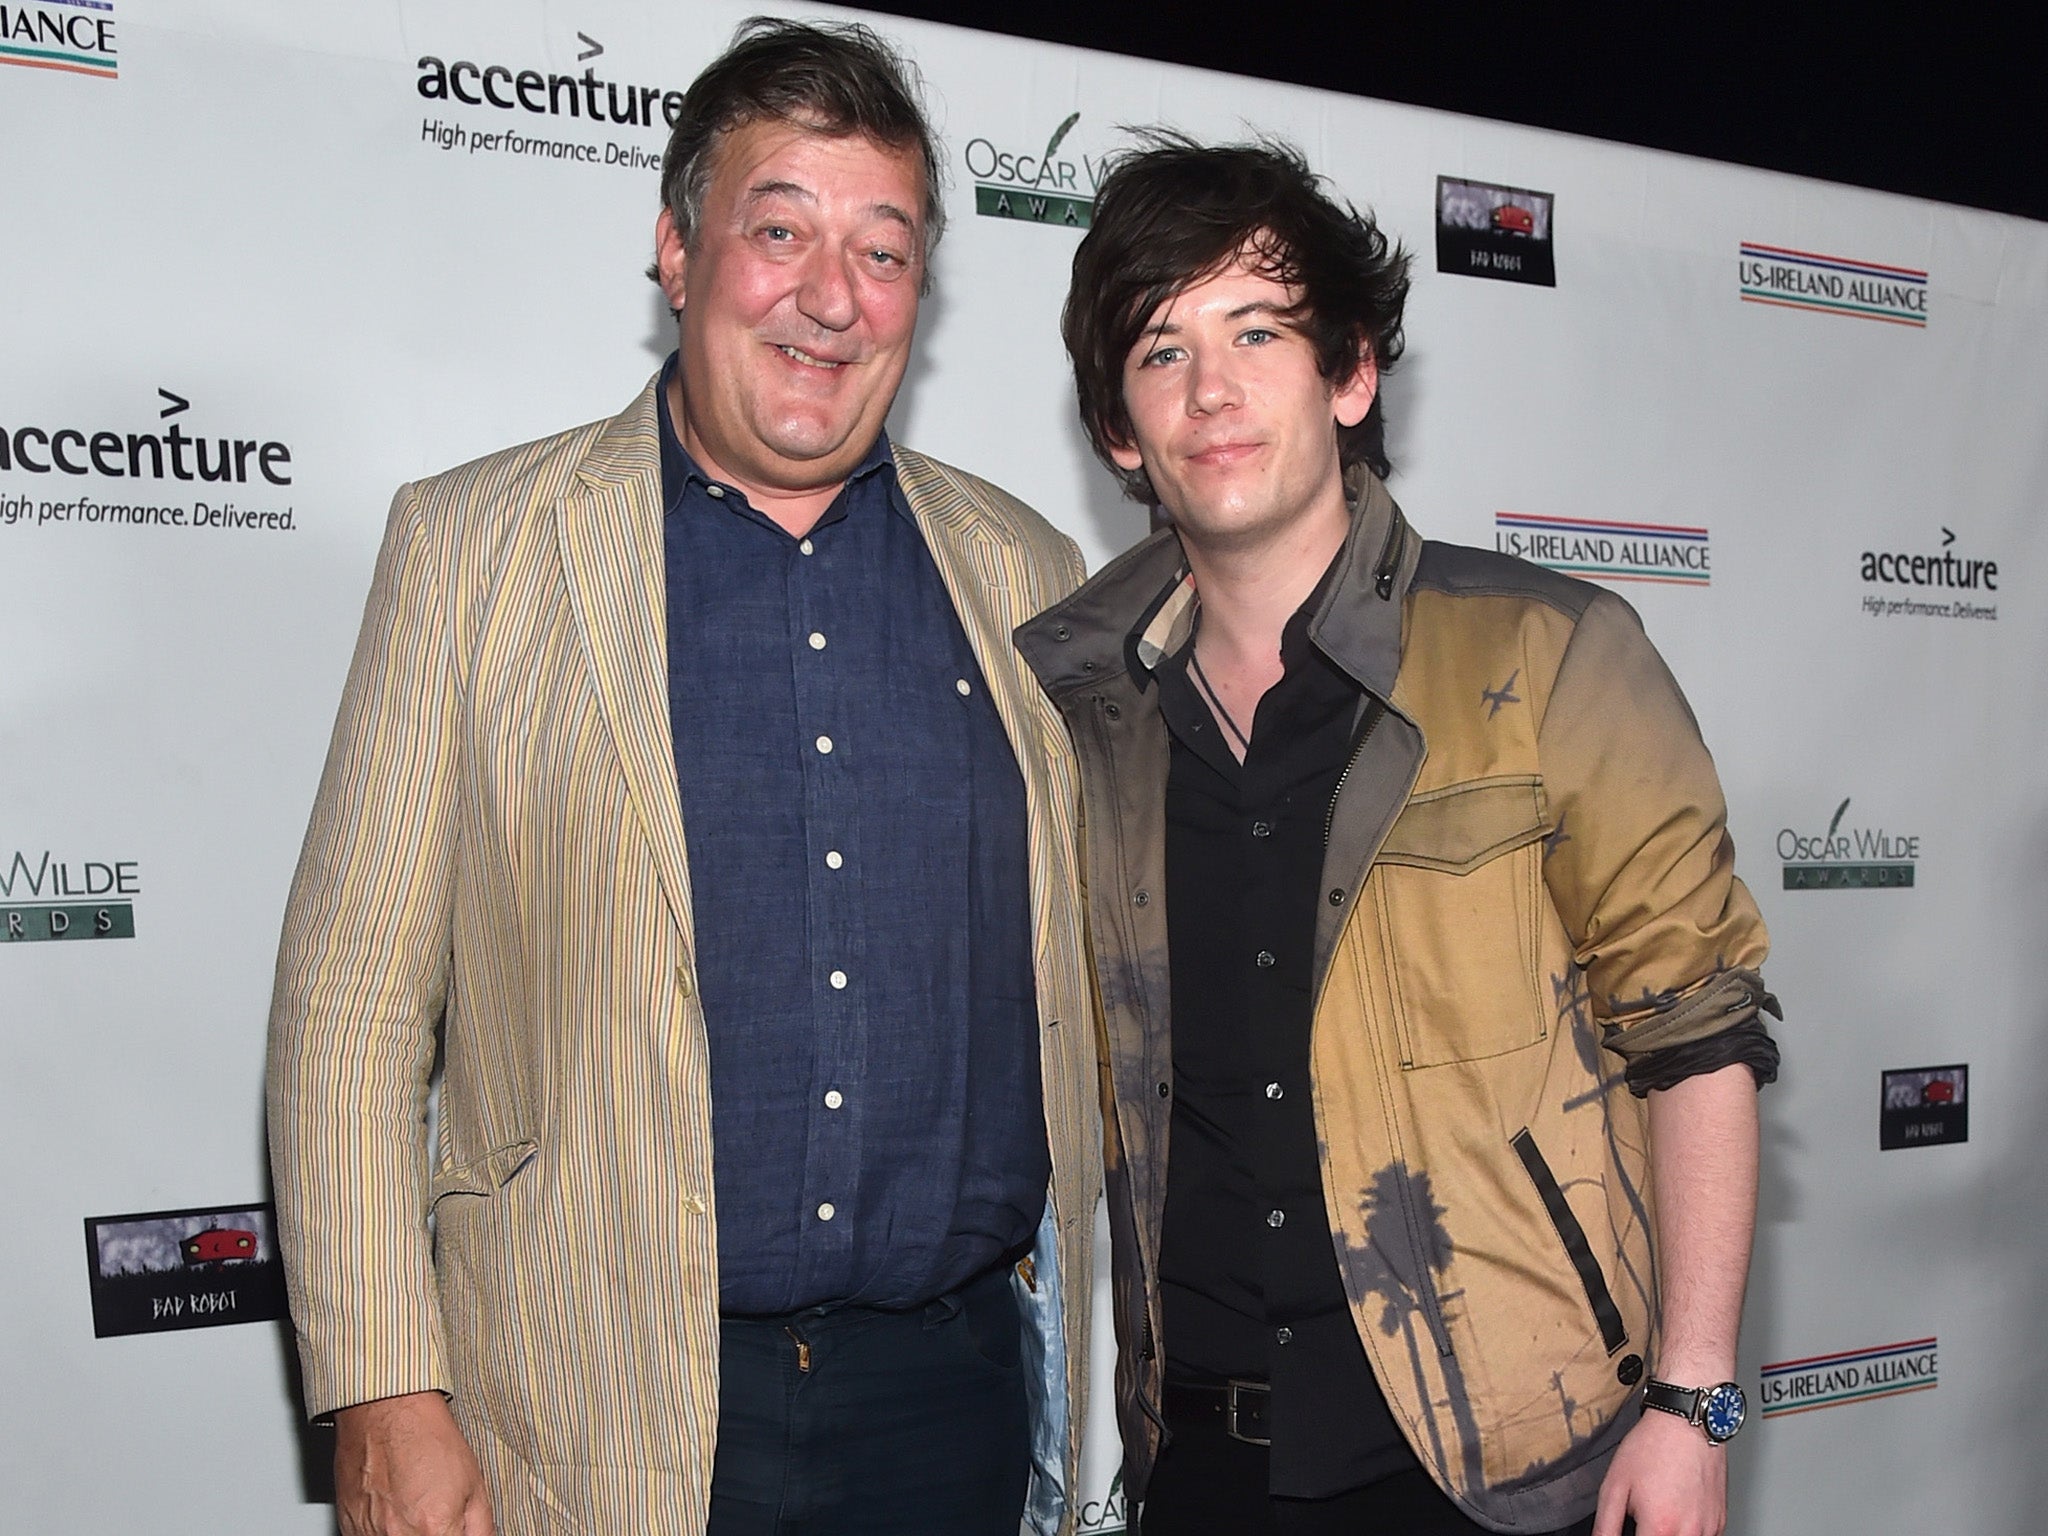 Married comedians Stephen Fry and Elliott Spencer attend the US-Ireland Aliiance's Oscar Wilde Awards event at J.J. Abrams' Bad Robot on 19 February 2015 in Santa Monica, California